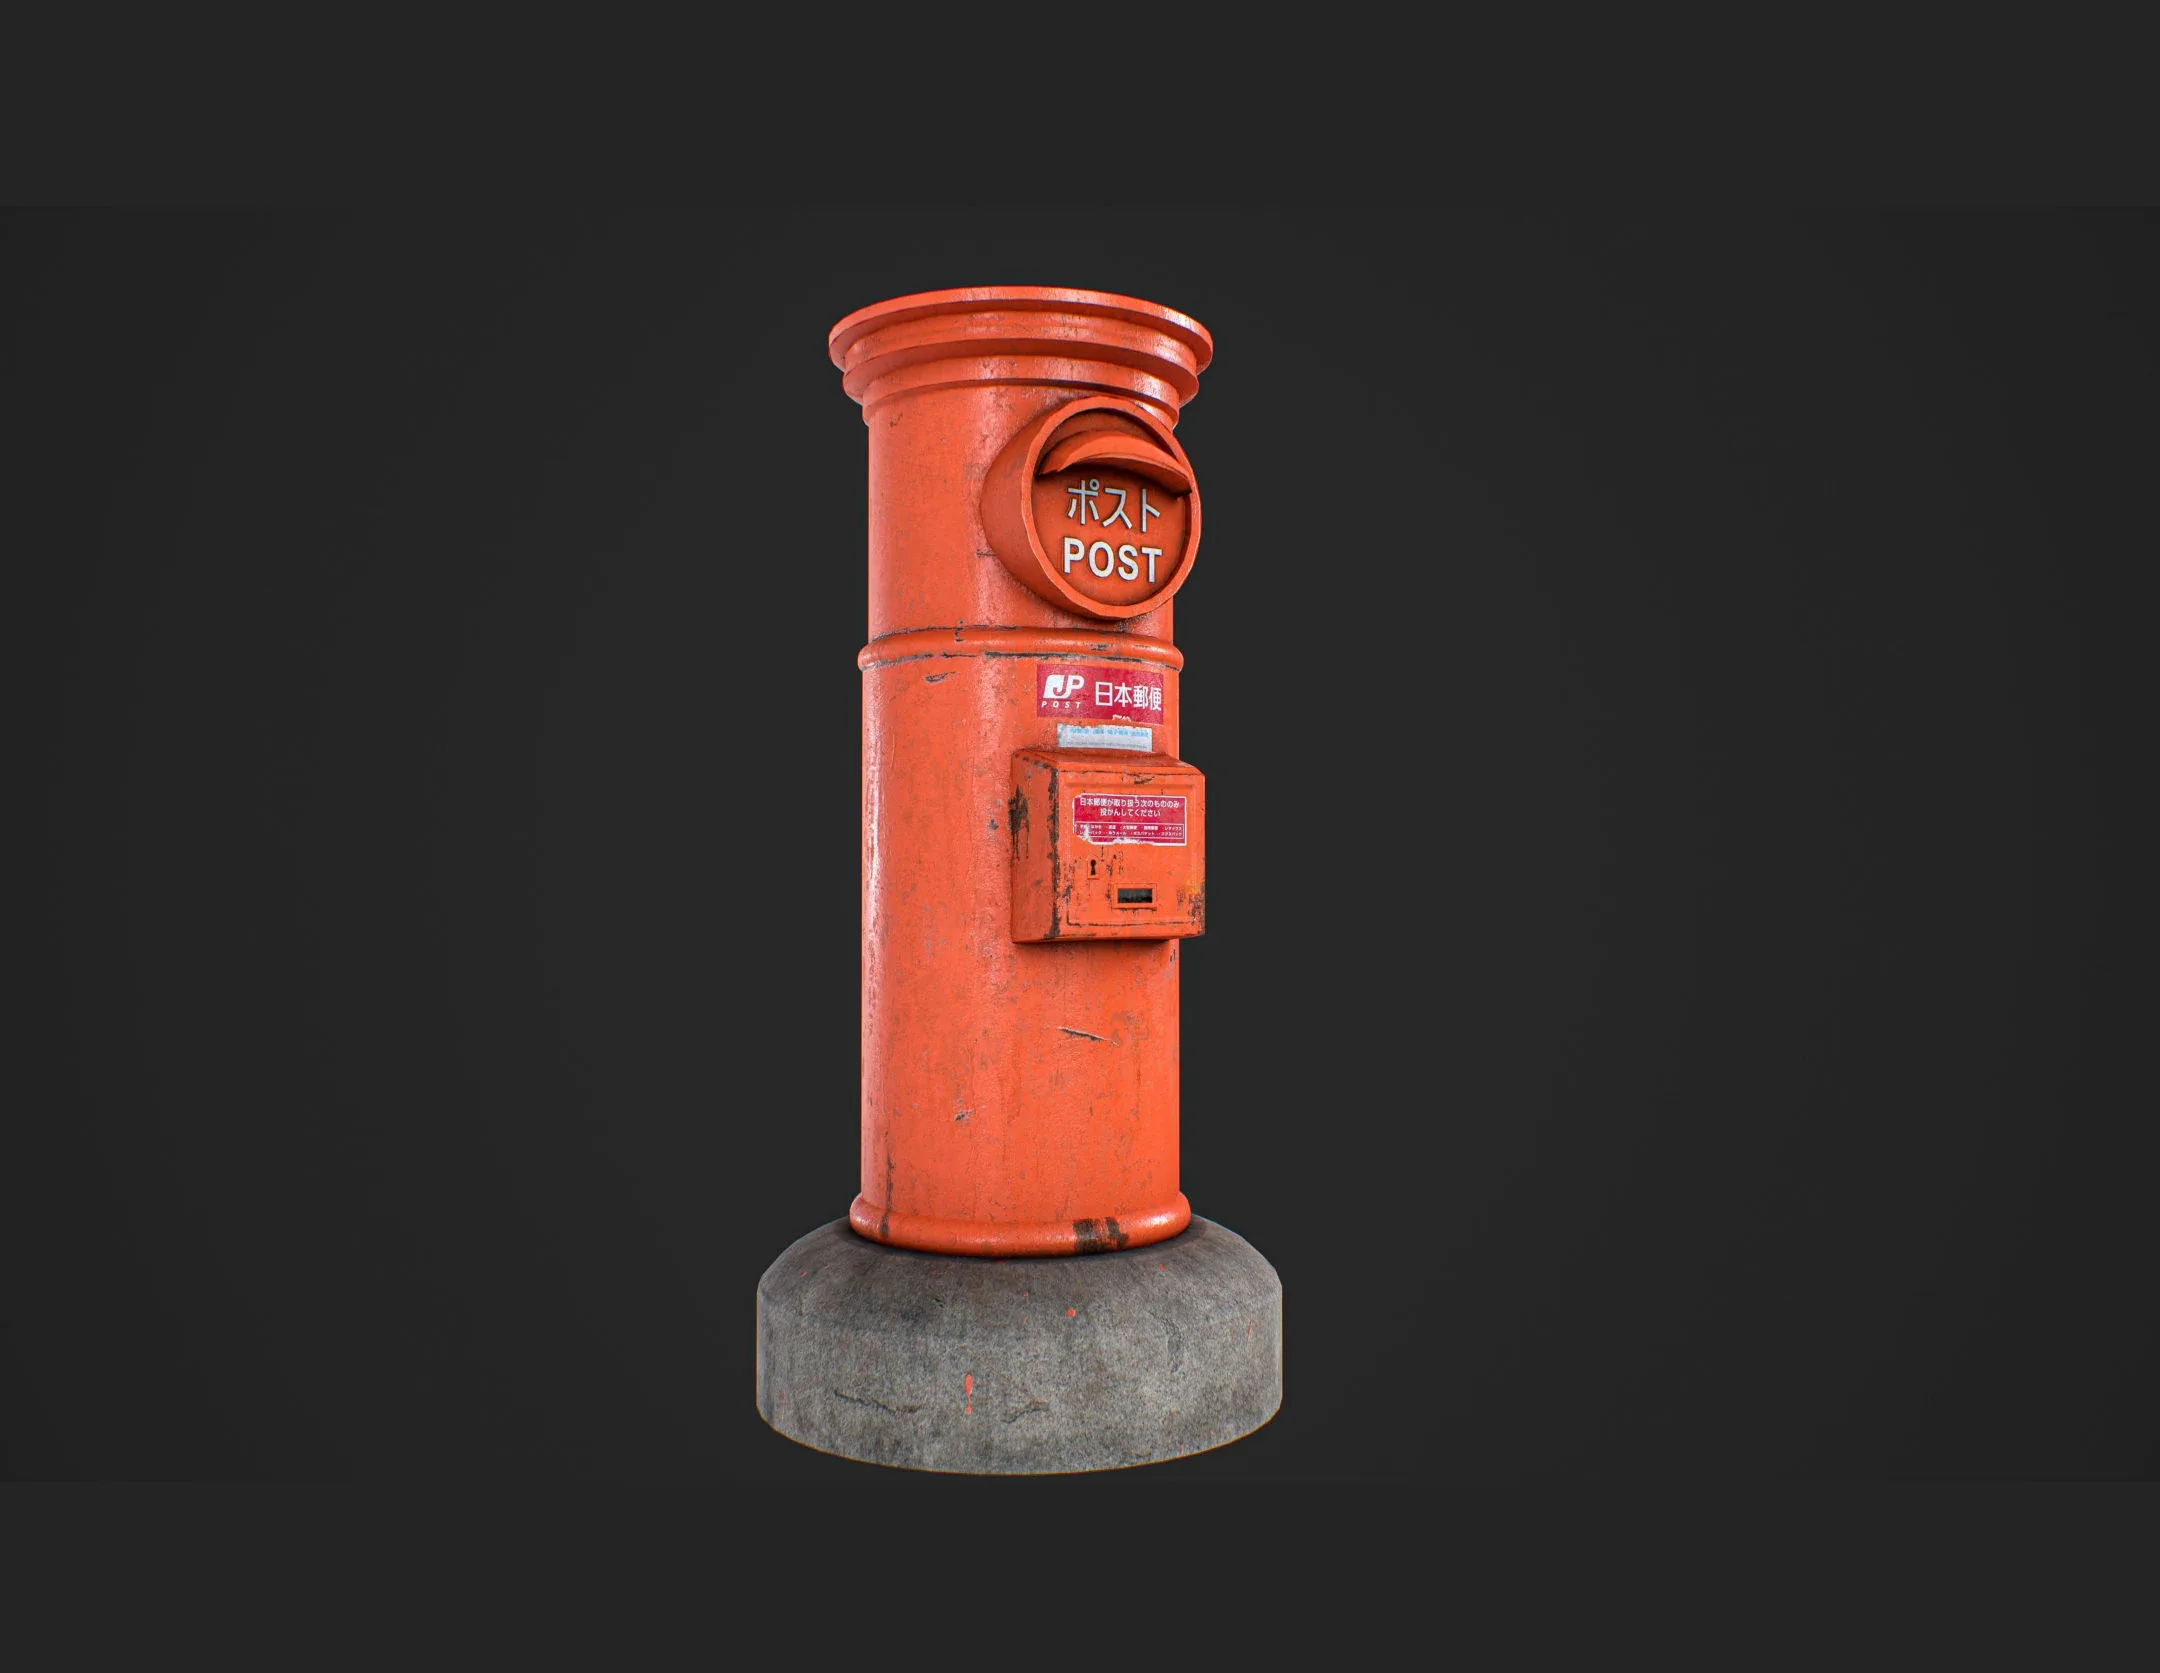 Post Box or Letter Box